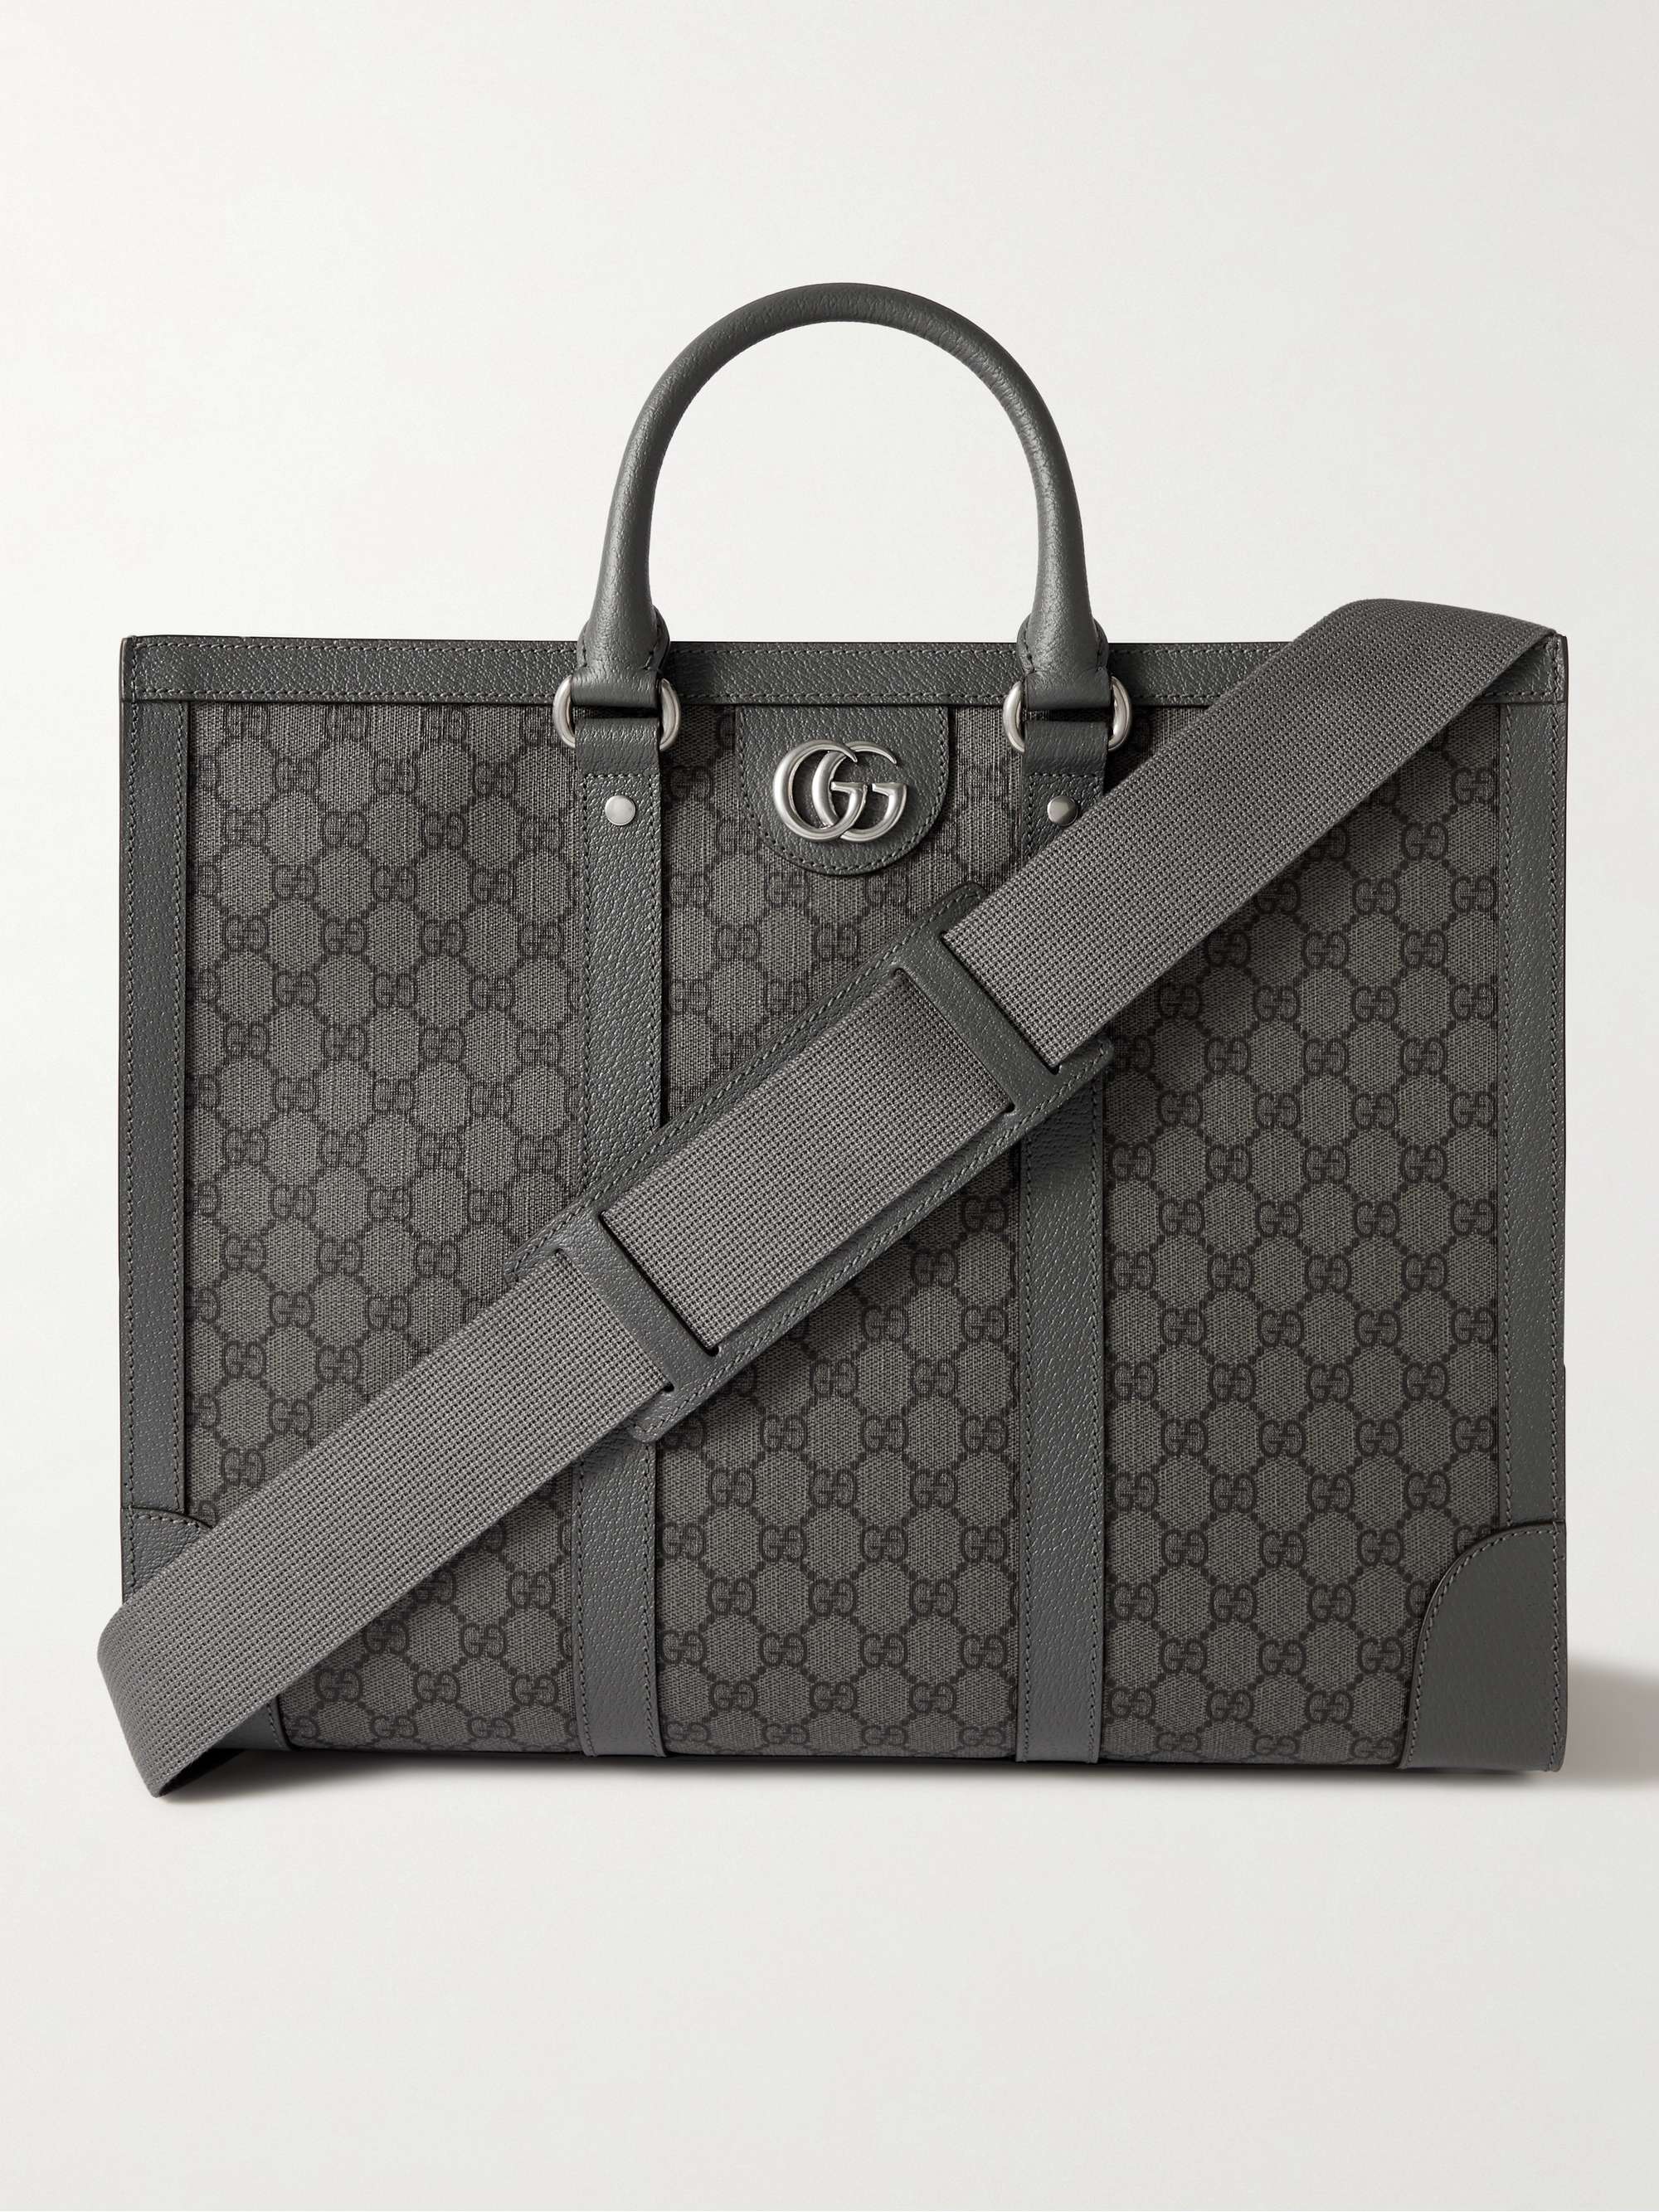 Gucci Men's Ophidia Leather-Trimmed Tote Bag